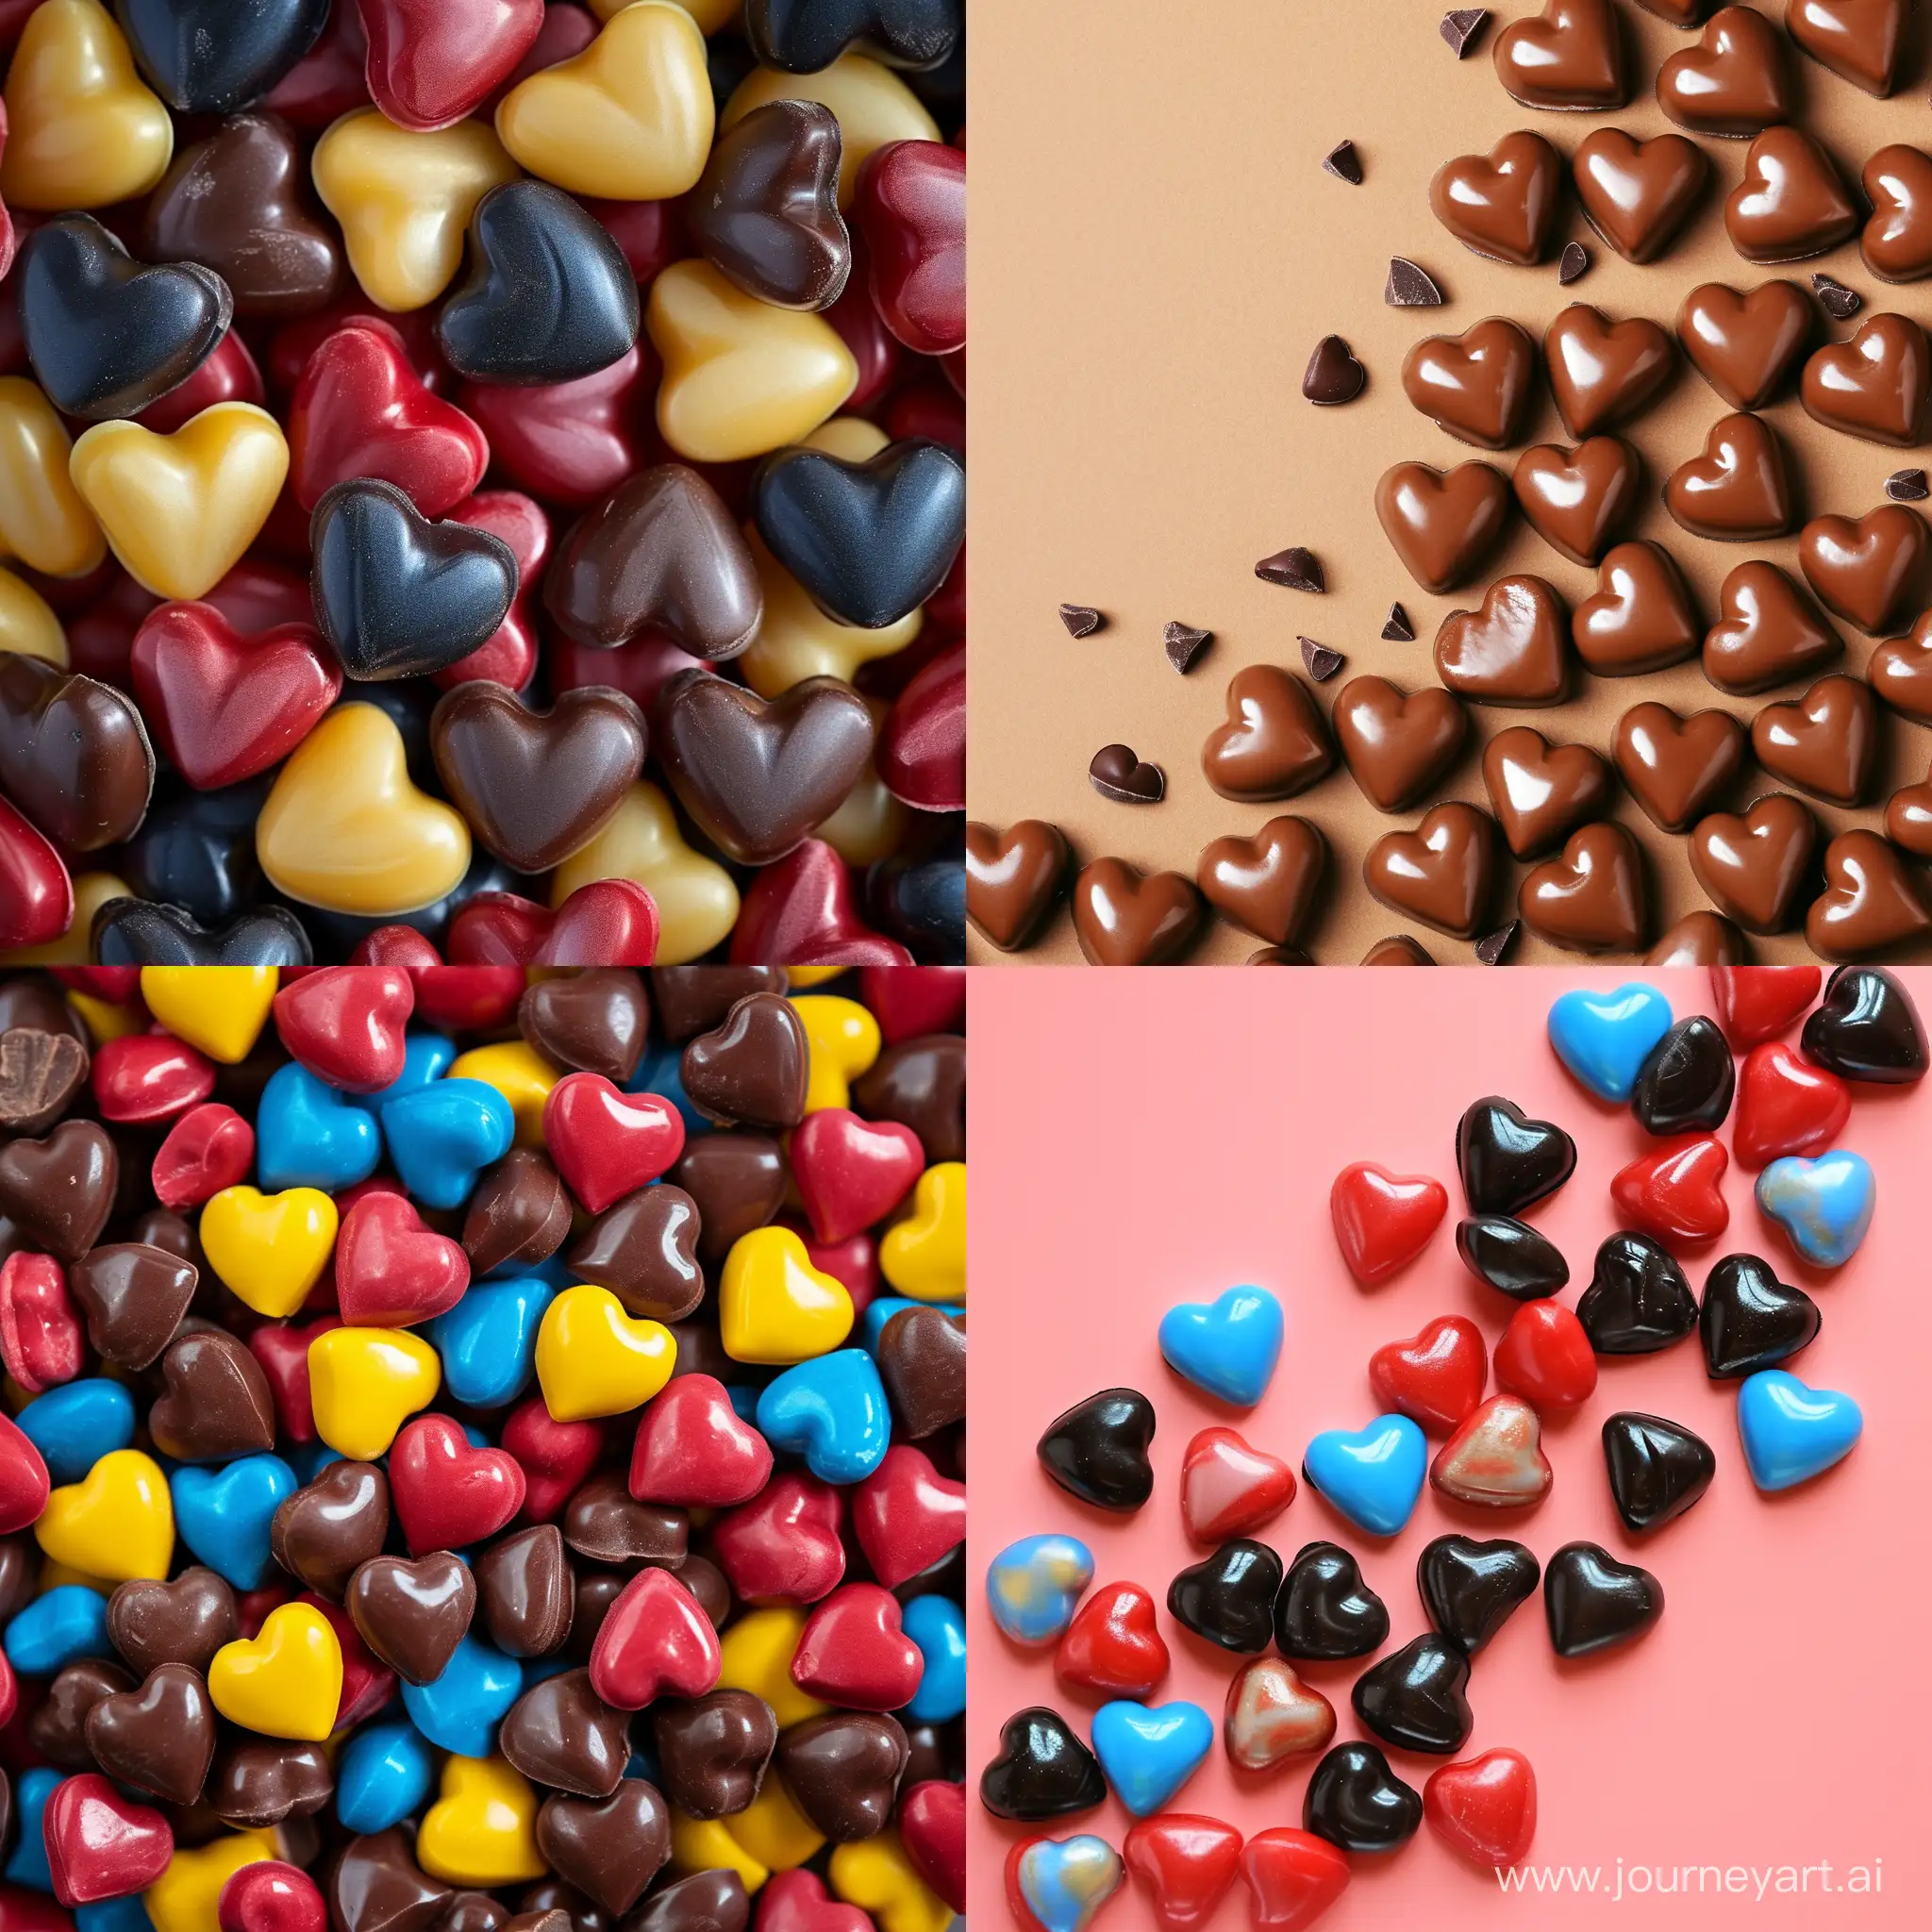 background with choco hearts candies